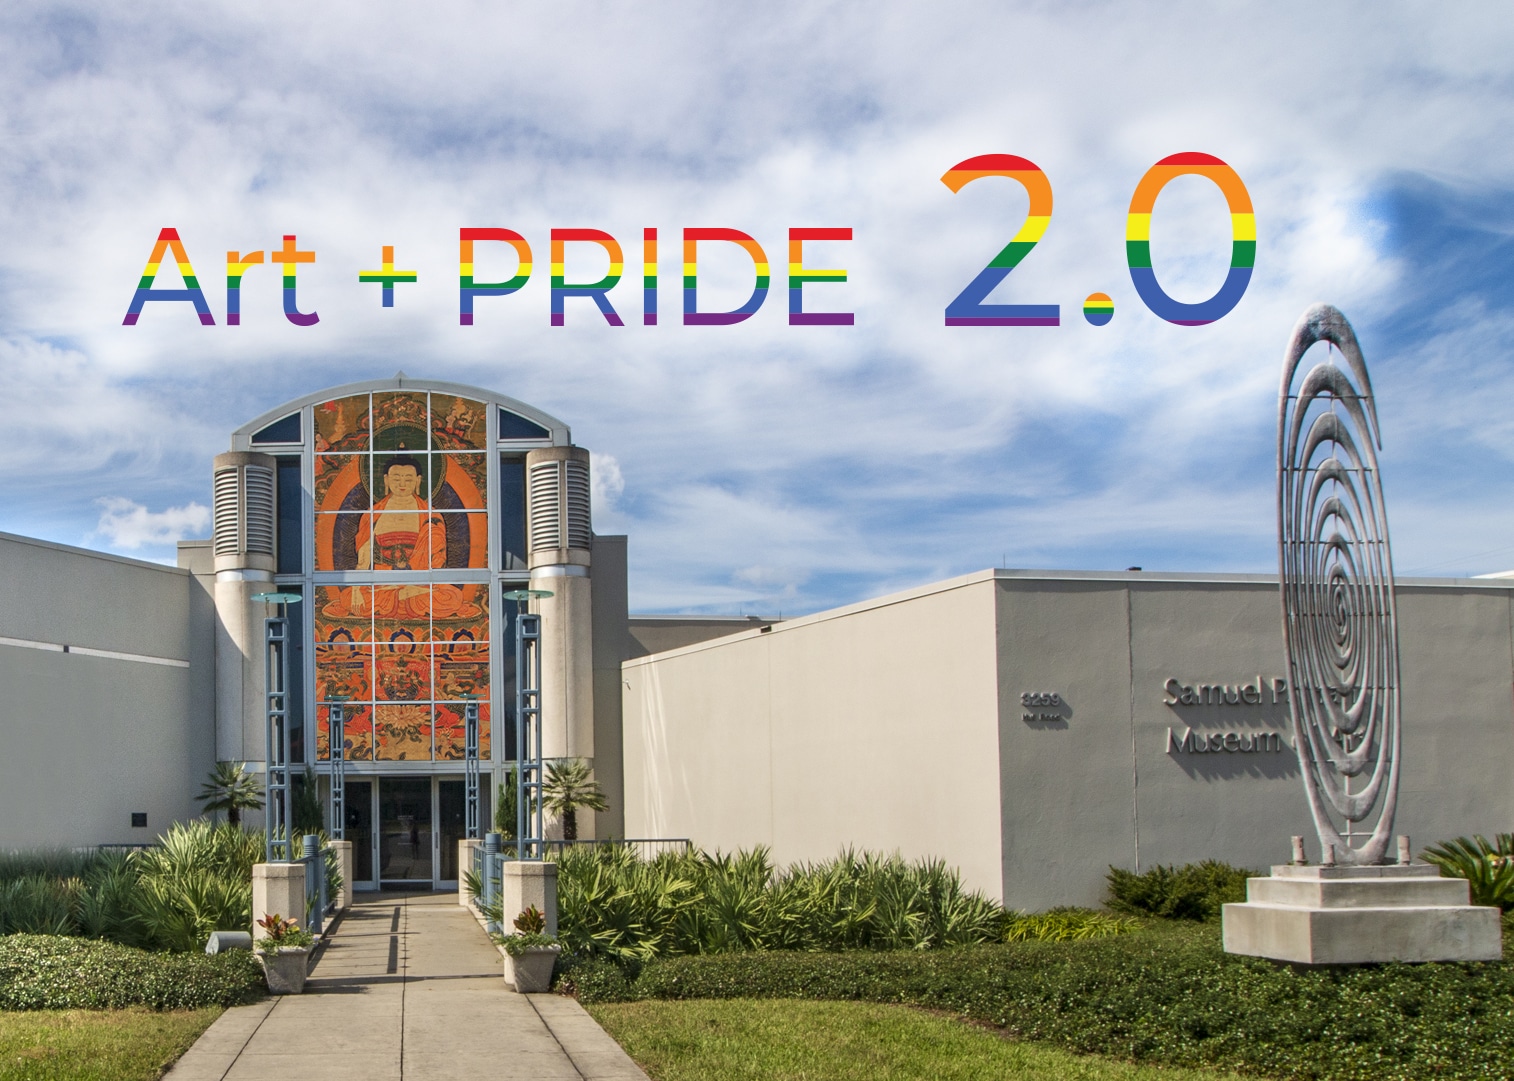 photo of the Harn Museum with a rainbow flag "Art + PRIDE 2.0" over the building